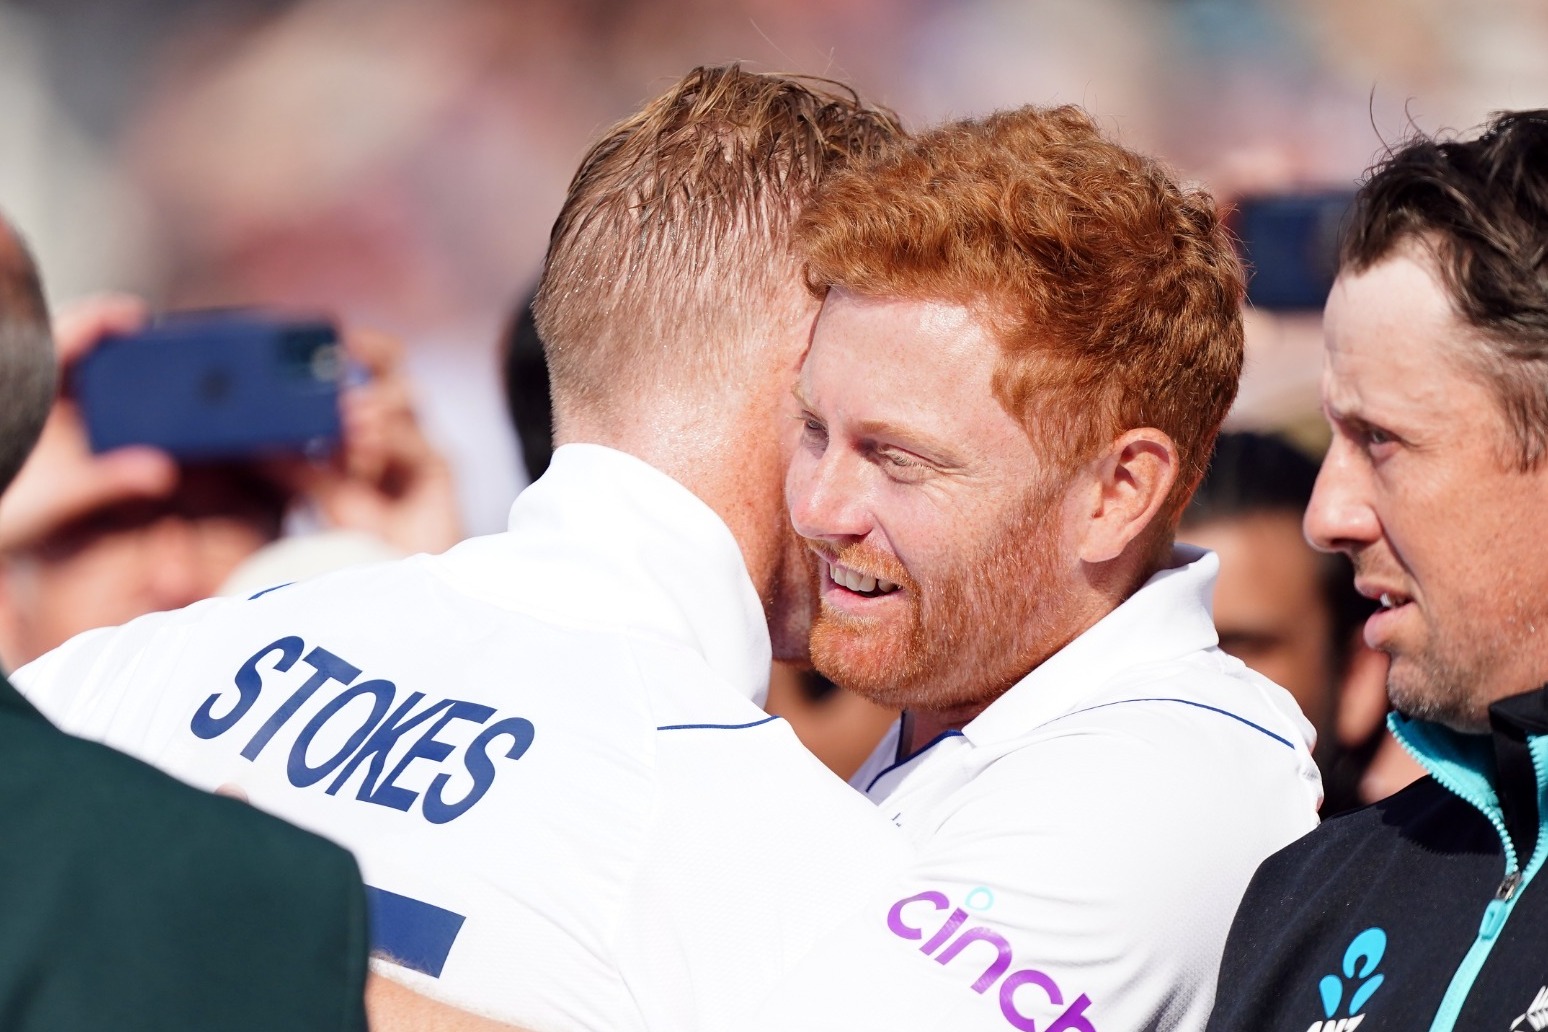 Jonny Bairstow scores Englands second fastest Test century in stunning victory